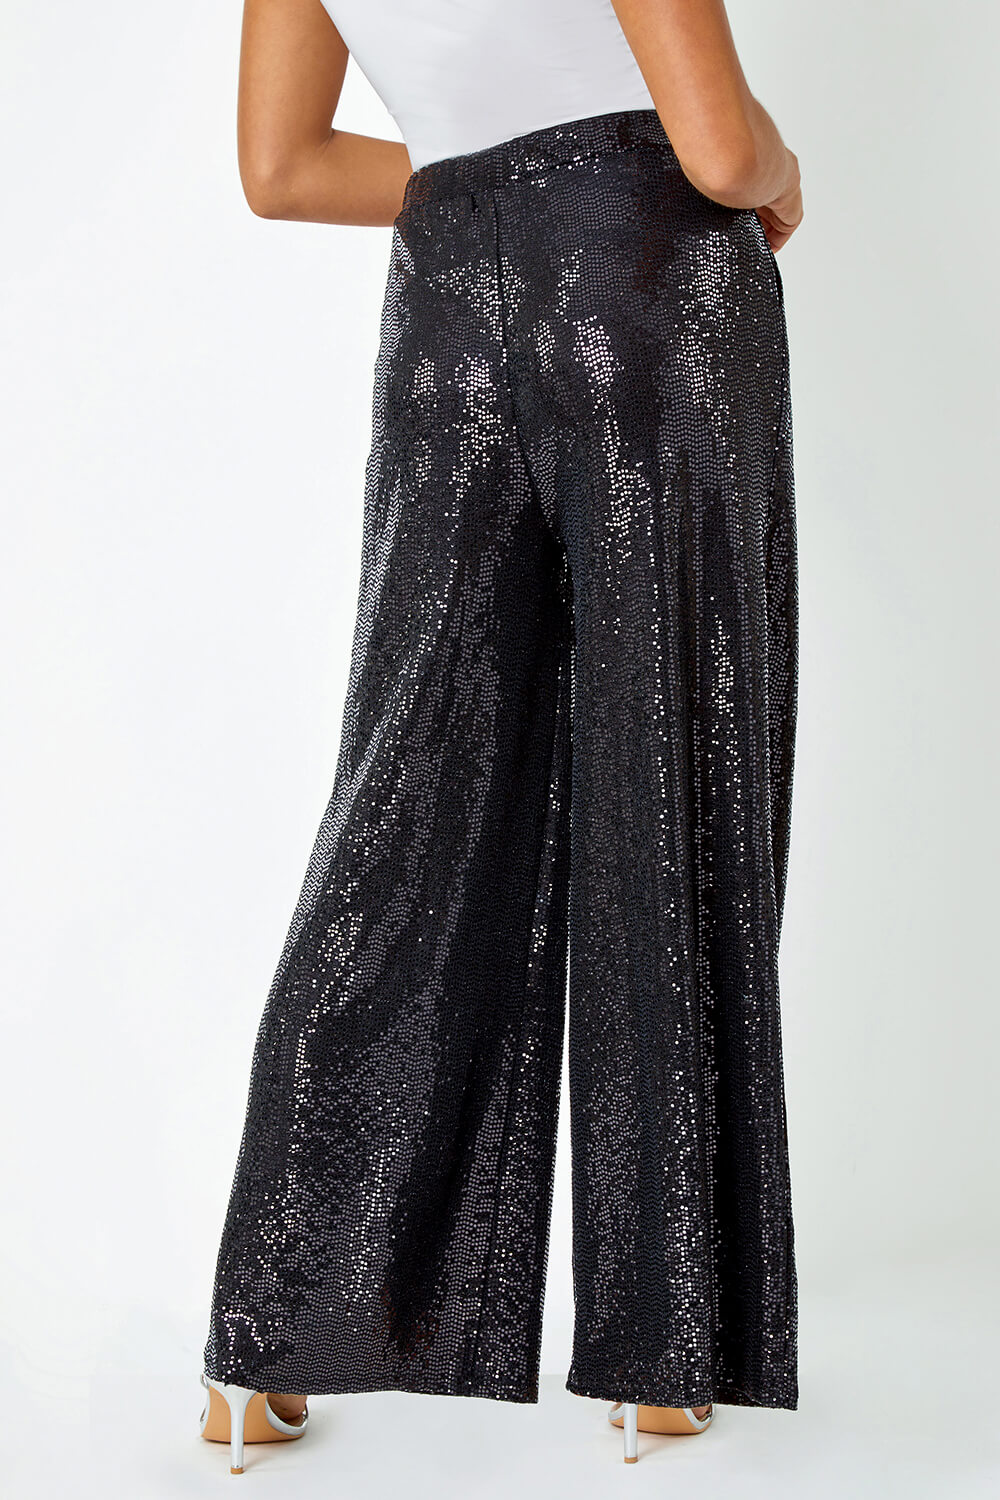 Black Wide Leg Sequin Stretch Trousers, Image 3 of 6